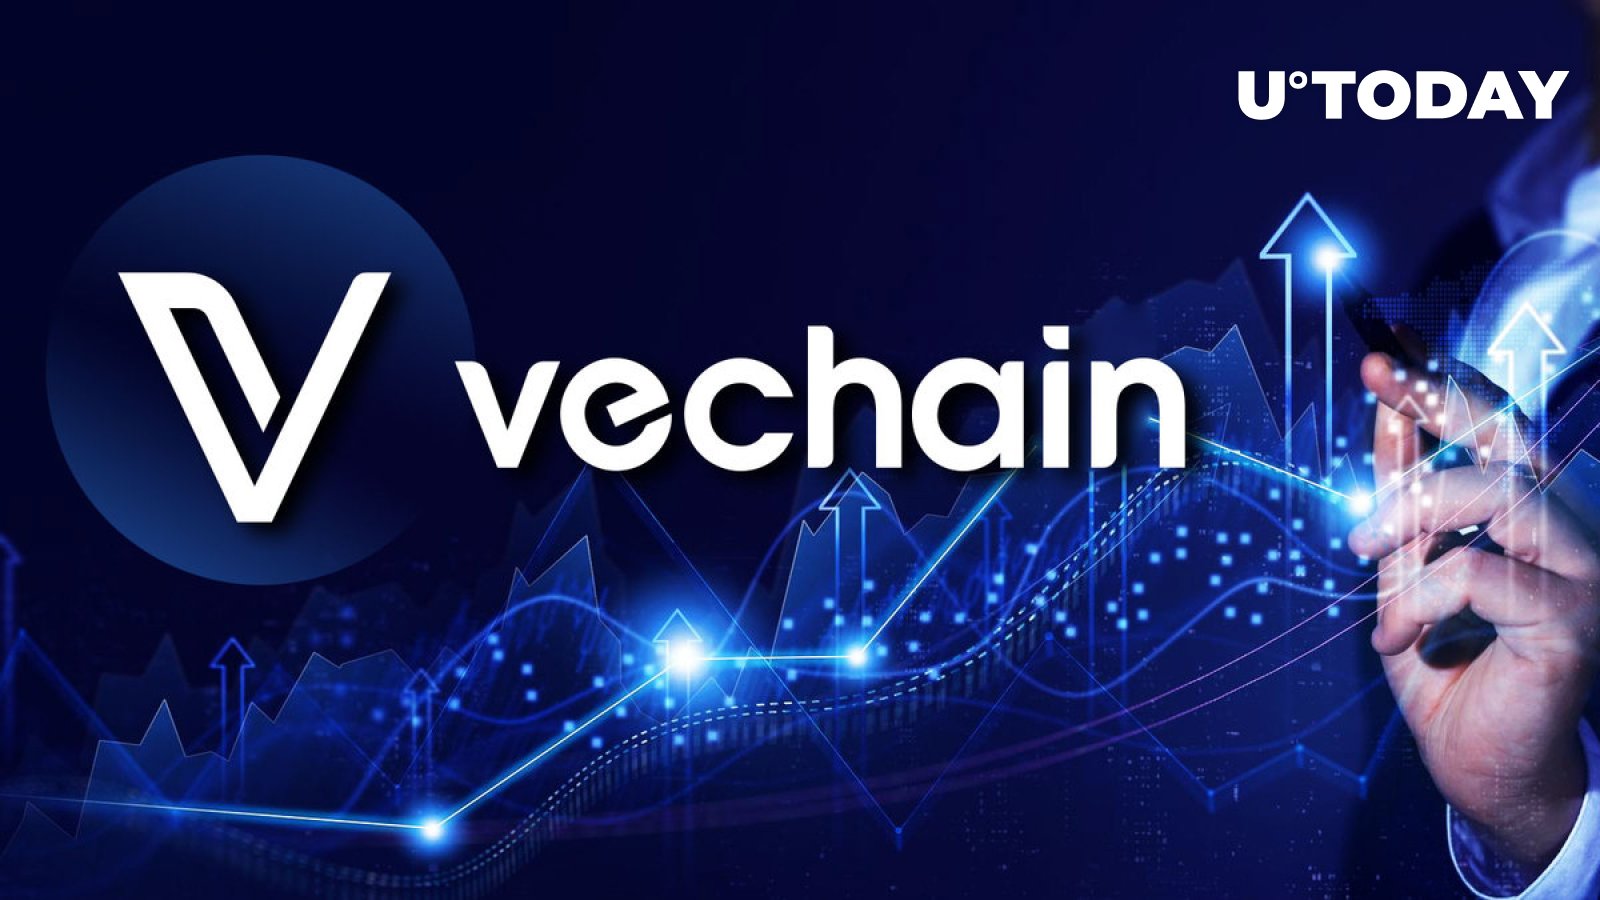 VeChain (VET) Skyrocketed 31% in Day; What’s Behind It?